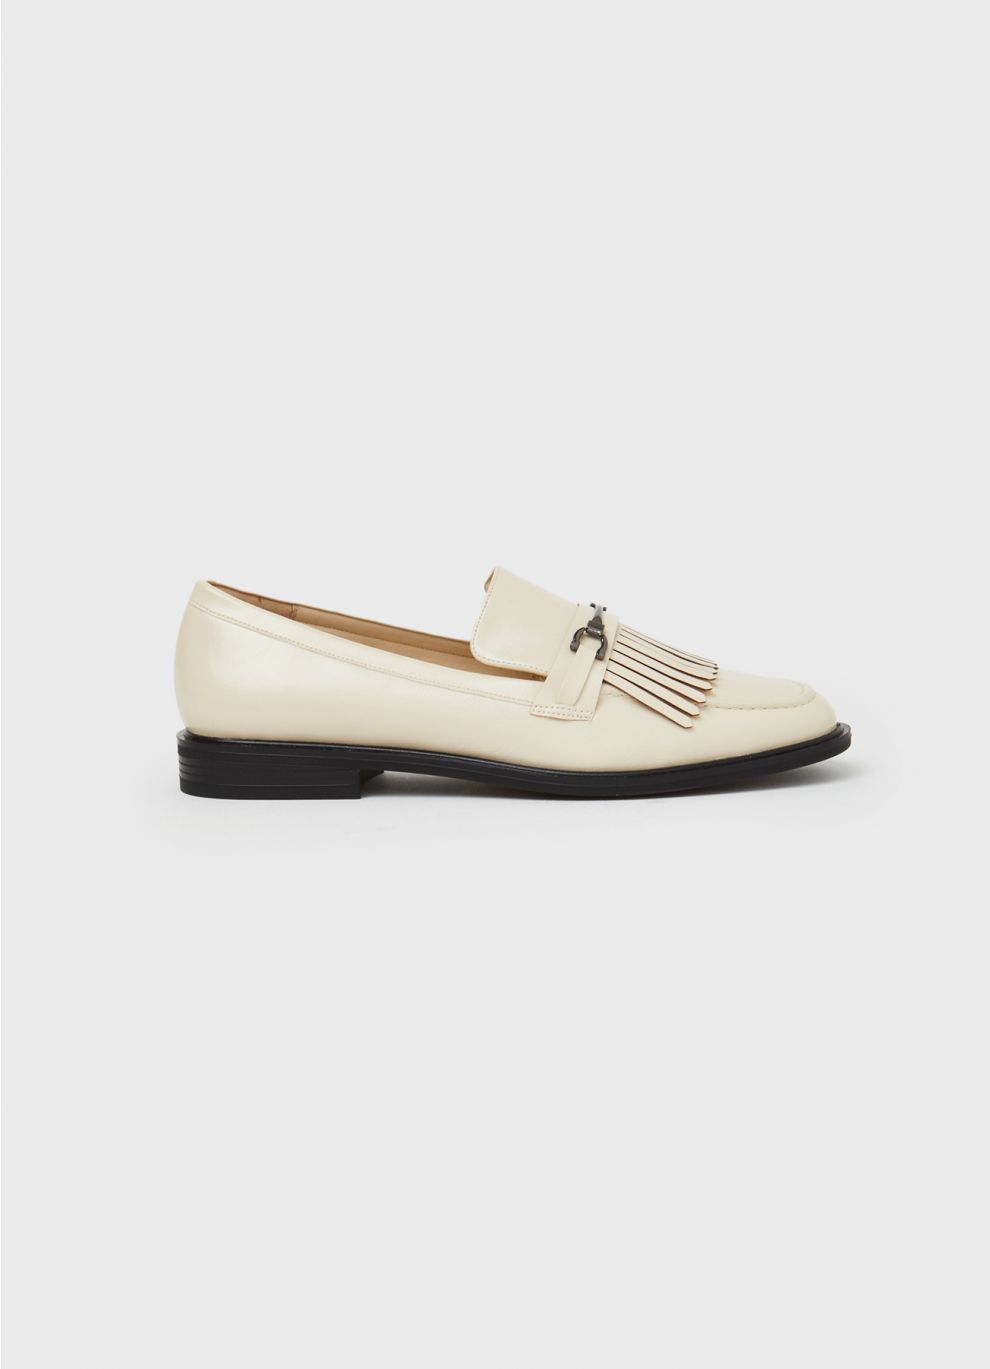 Calliope - Chalk shoes - Buy Online